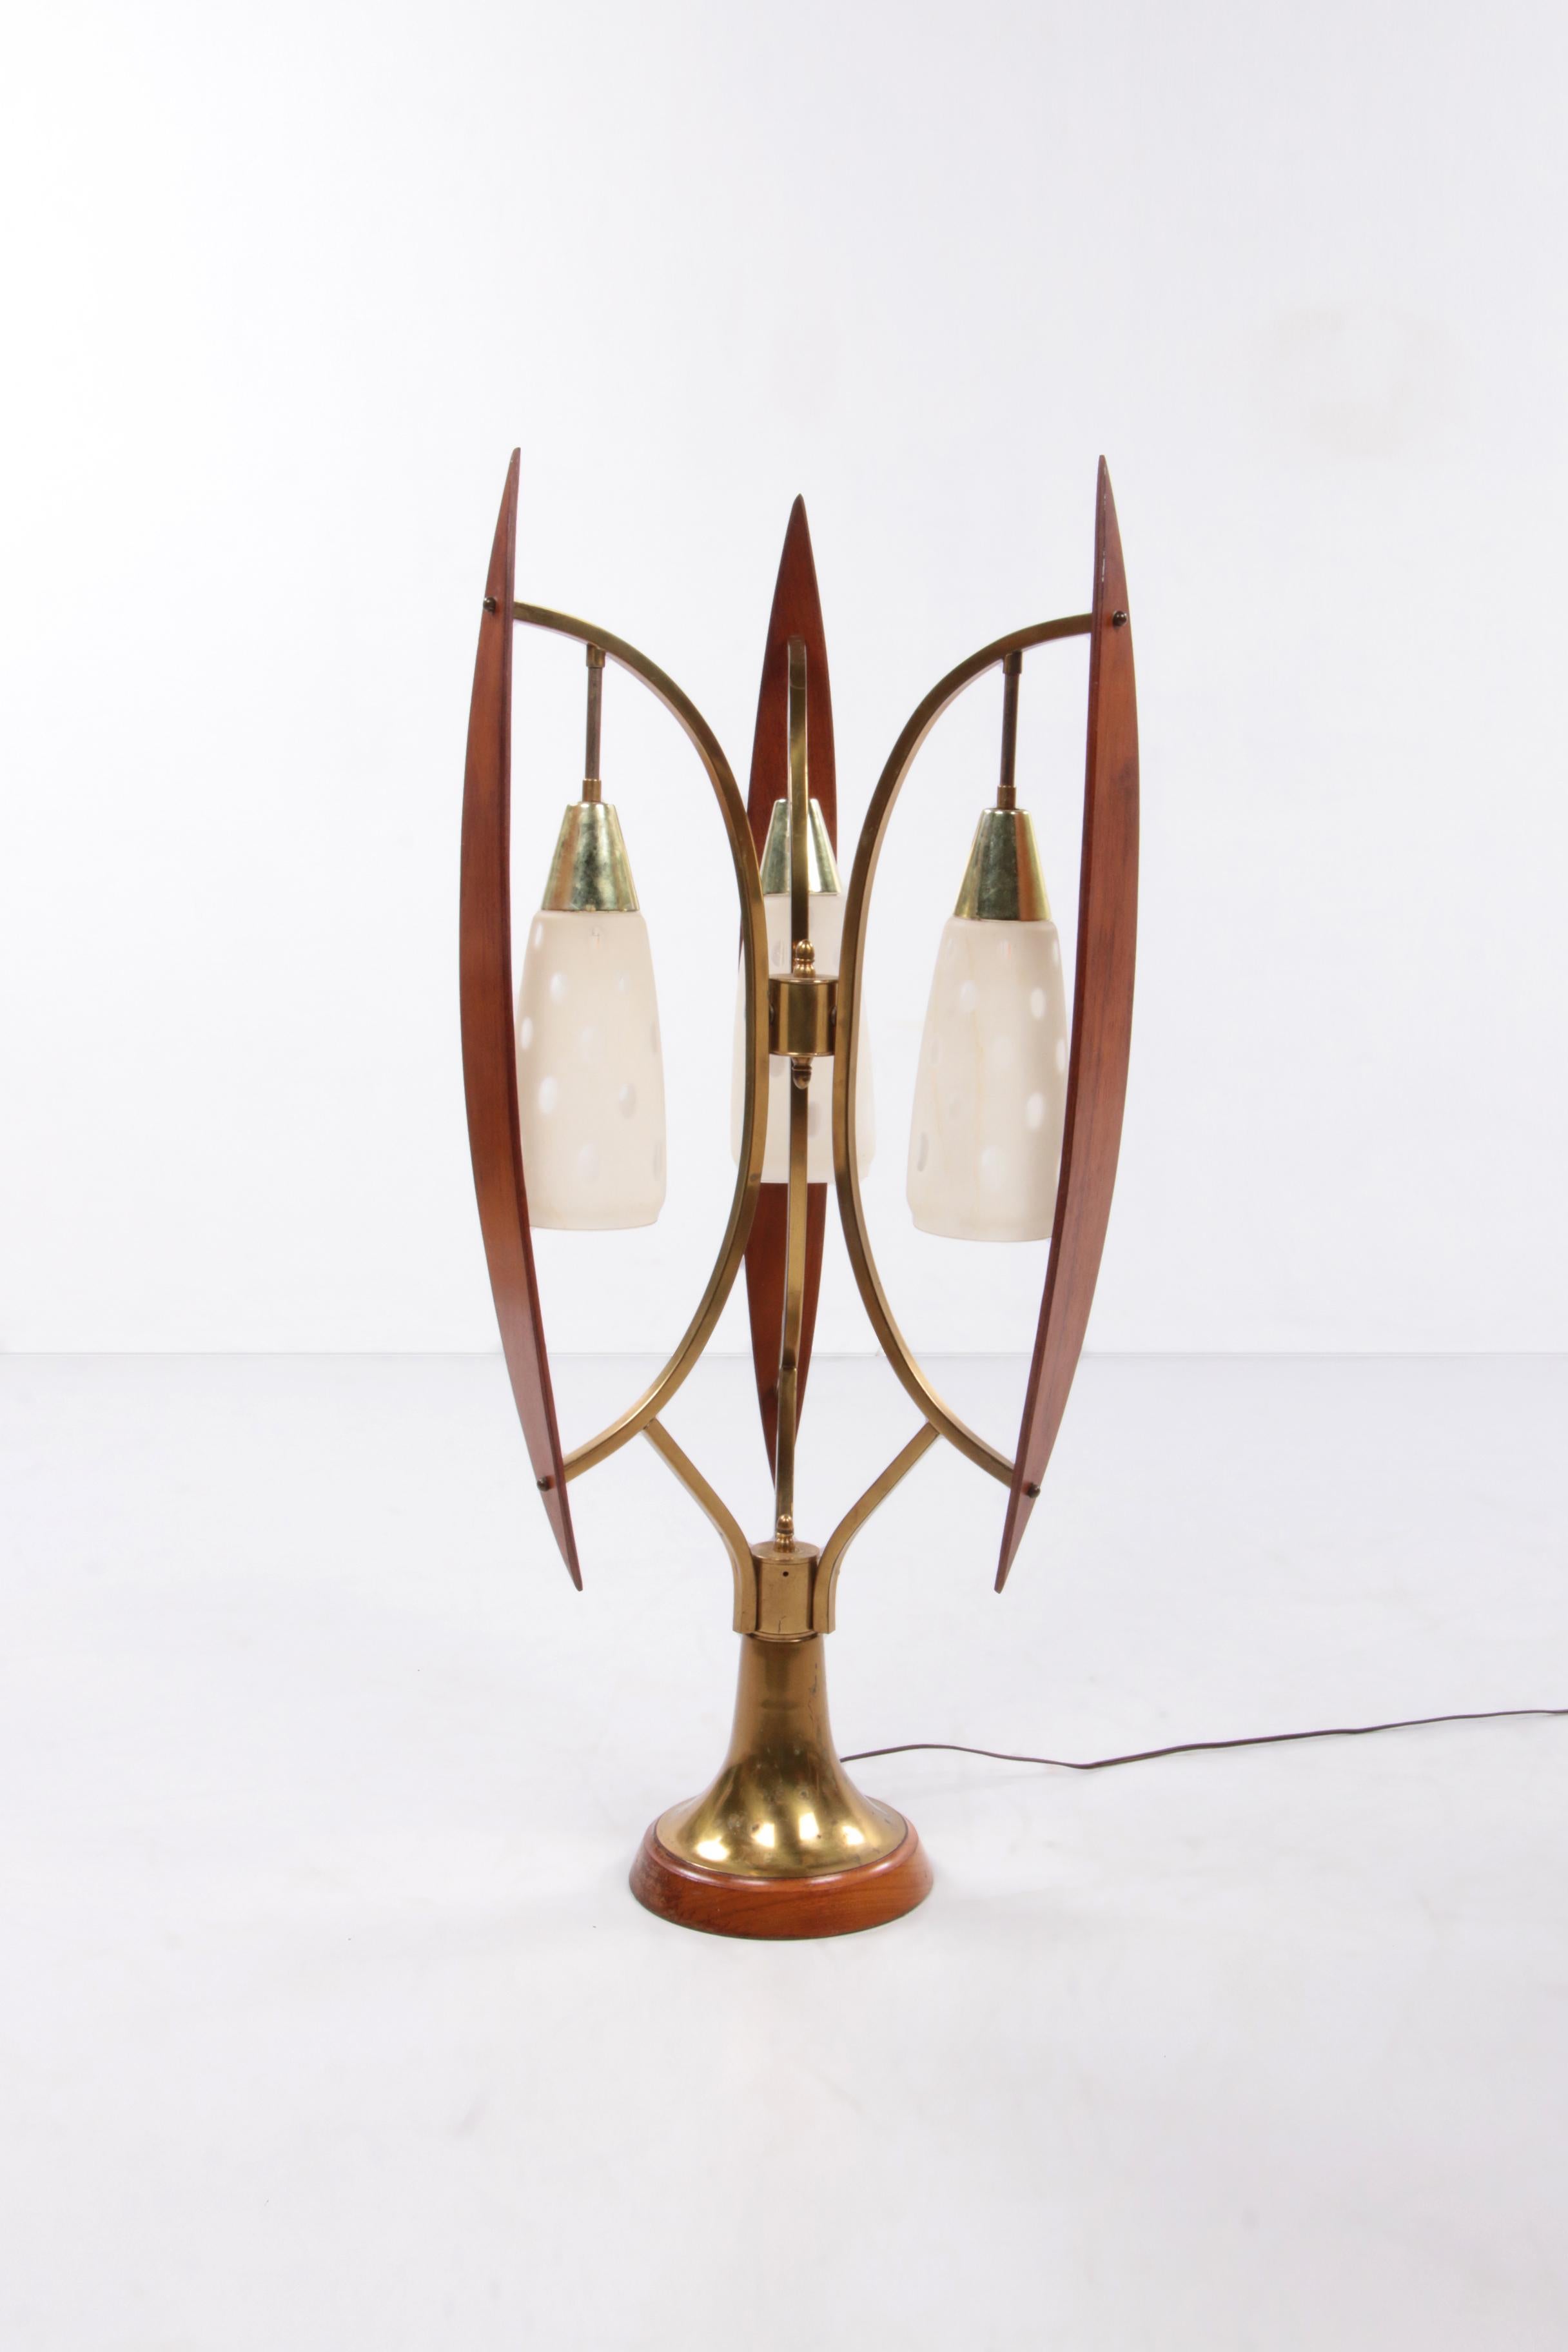 French floor lamp with milk glass shades 1960


This is a beautiful French floor lamp or table lamp.

Made in the 1960s from walnut and brass.

The foot is made of wood with a nice brass foot over it, then three nice arms made of brass with